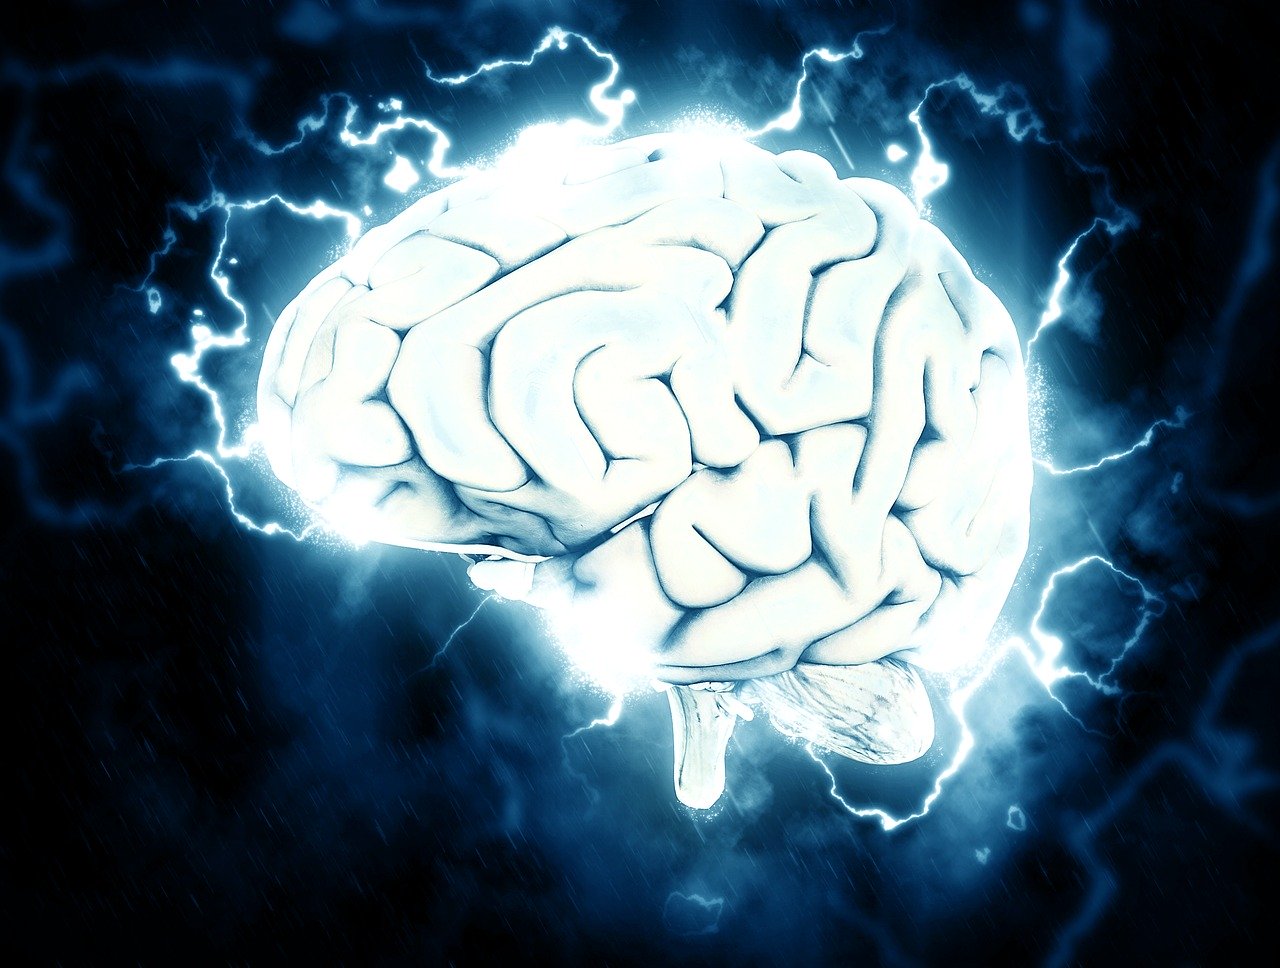 a picture of a brain firing off electrical signals